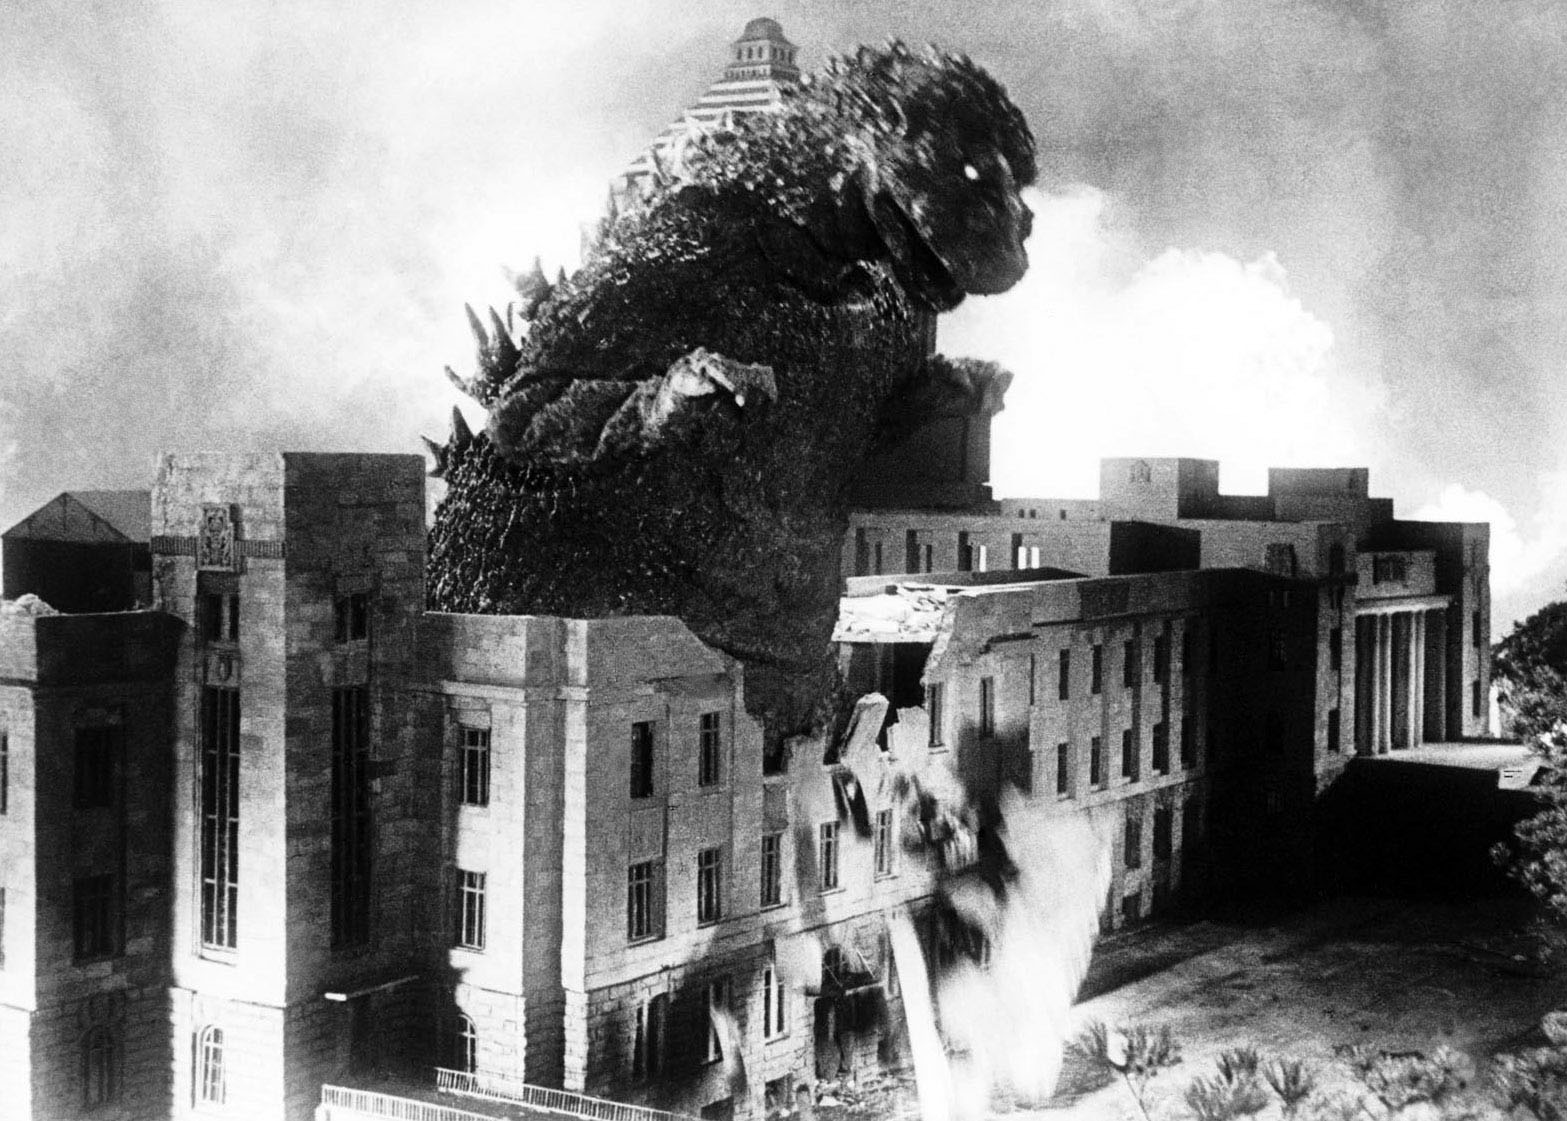 black and white photo from "Gojira (Godzilla)" (1954). It depicts Godzilla walking right through a building amid his rampage of destruction